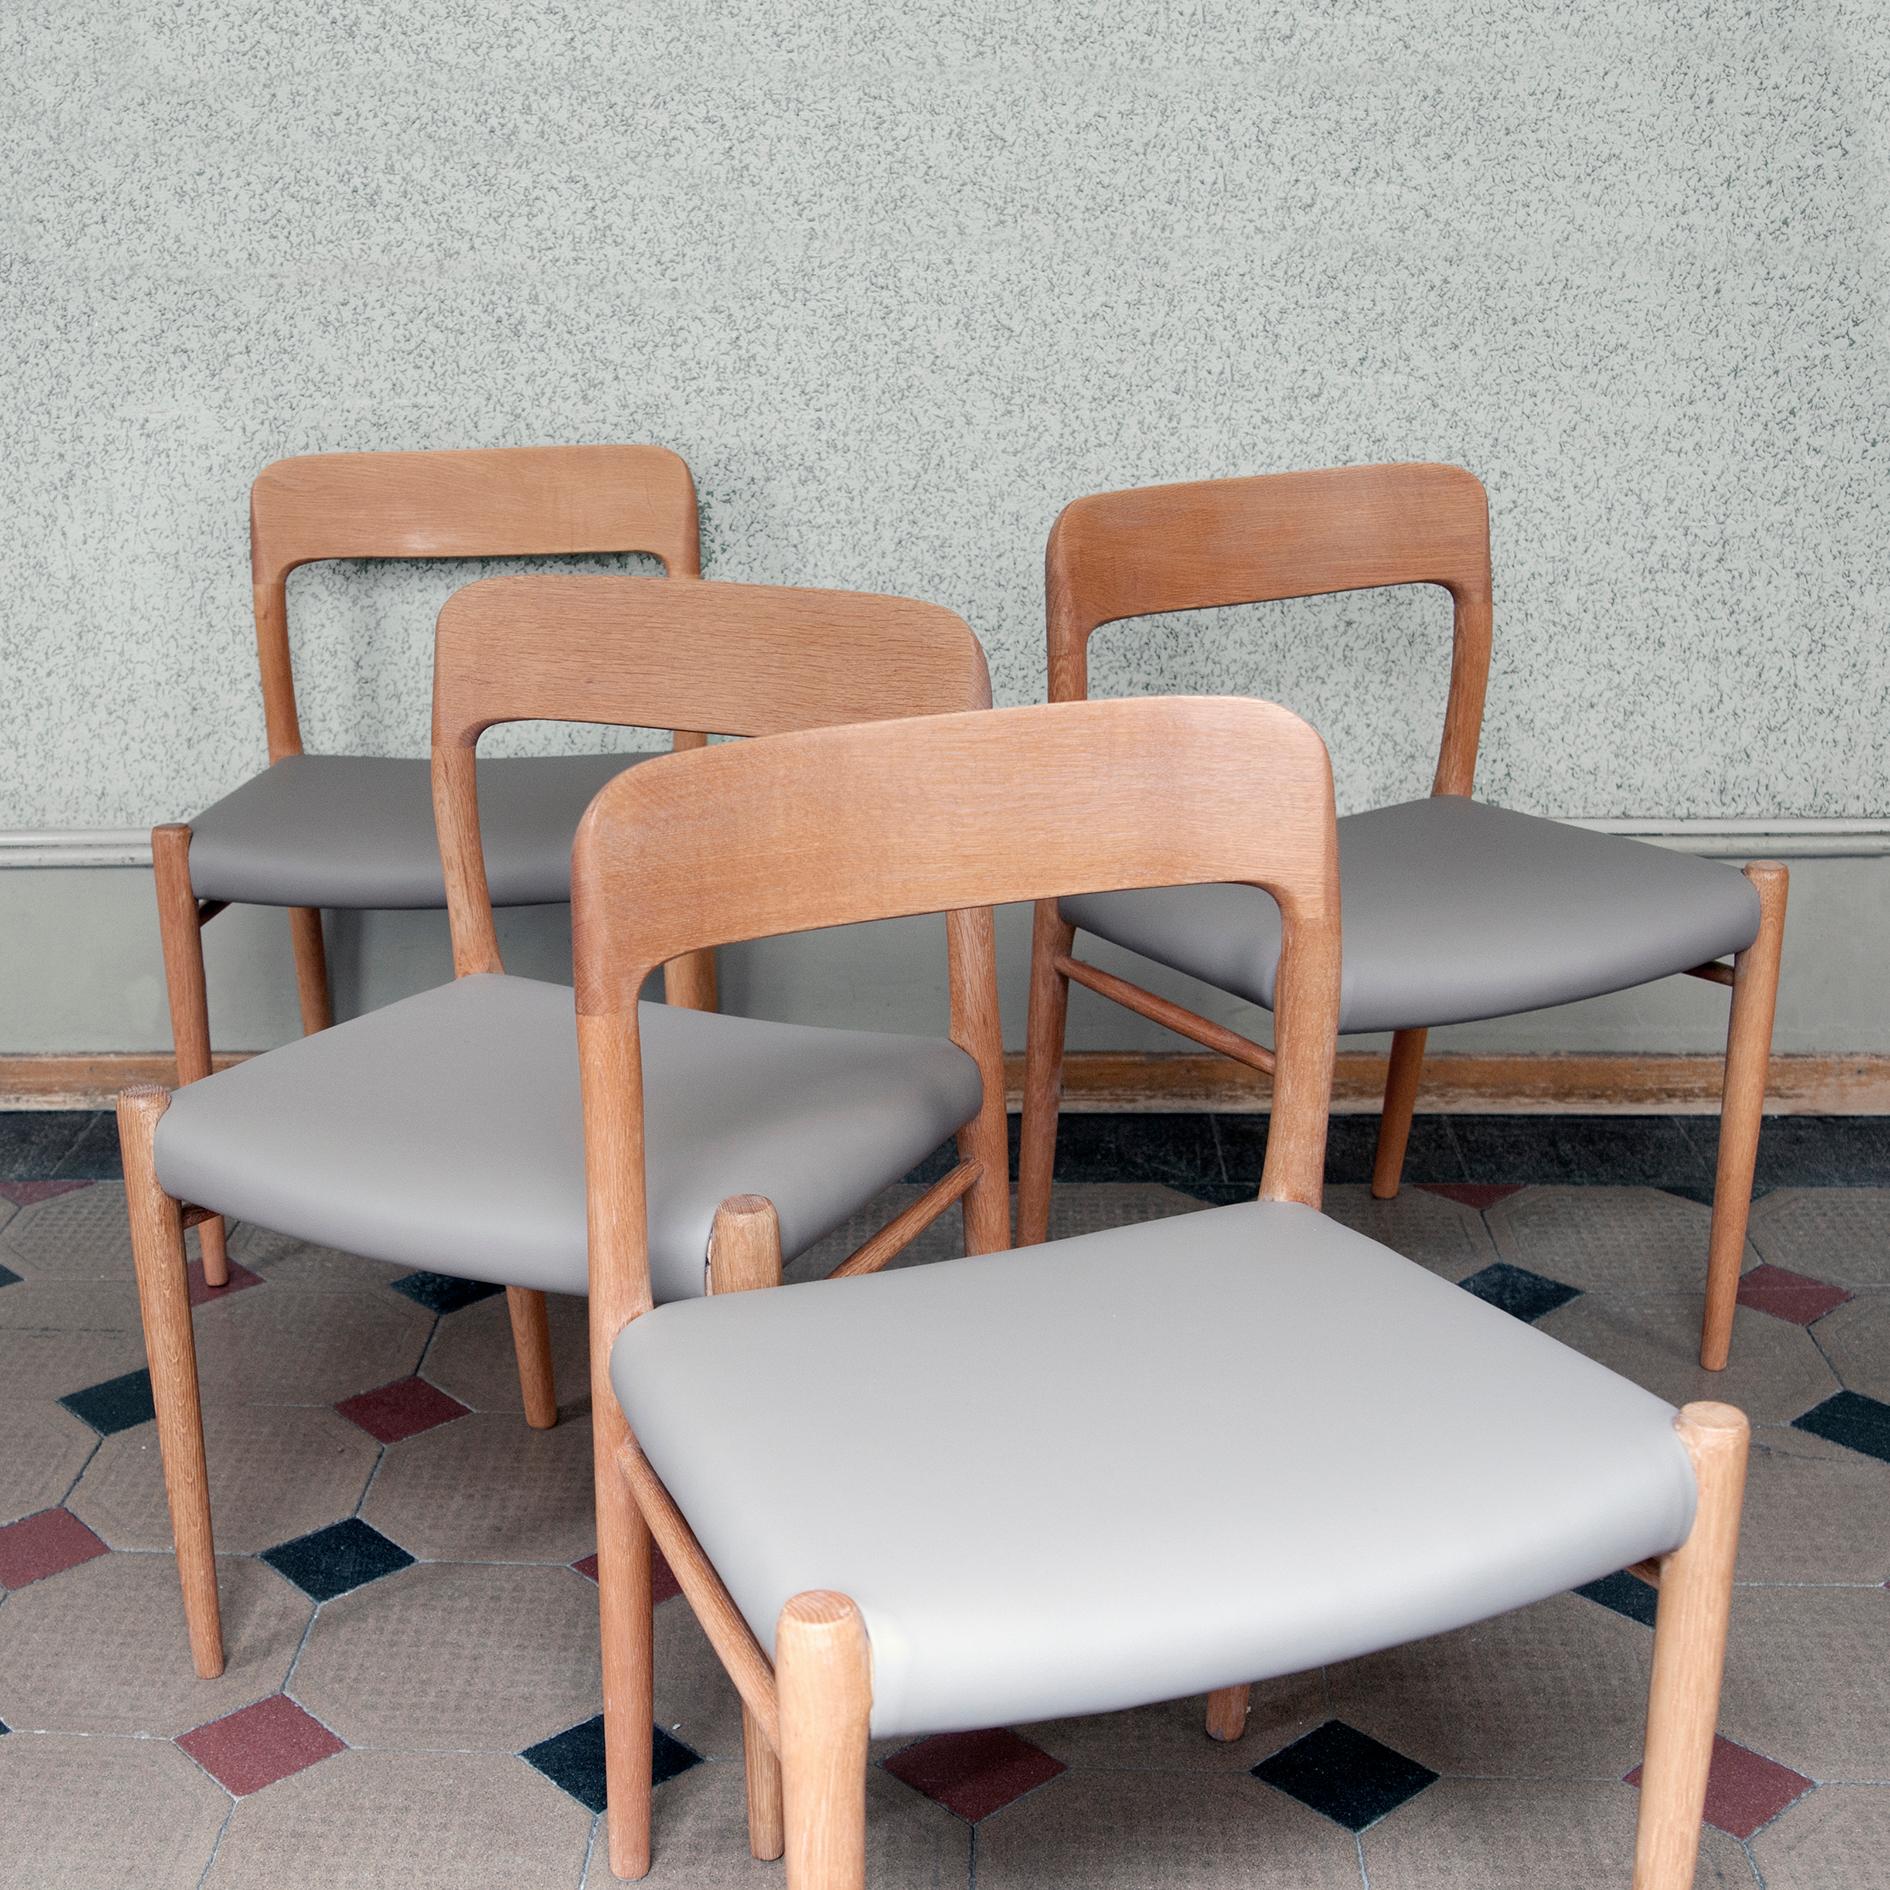 A wonderful set of four oak Danish Mid-Century Modern dining chairs by Niels O. Møllerfor J.L. Møller. This was the second design Møller created and proved to be very popular due of its modest footprint and organic design. The rounded backrest is